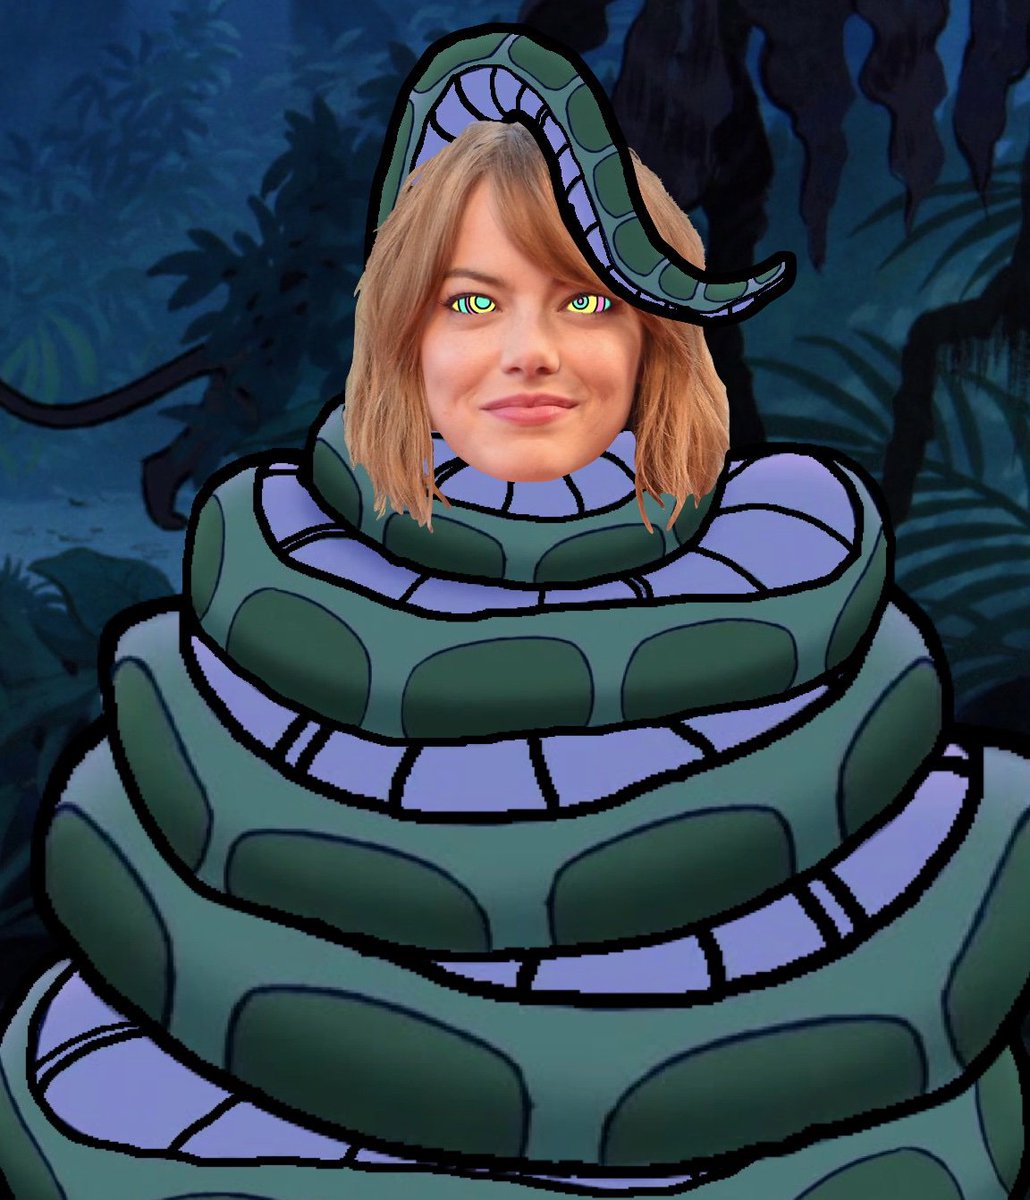 Here's Emma Stone back in Kaa's coils and under his spell